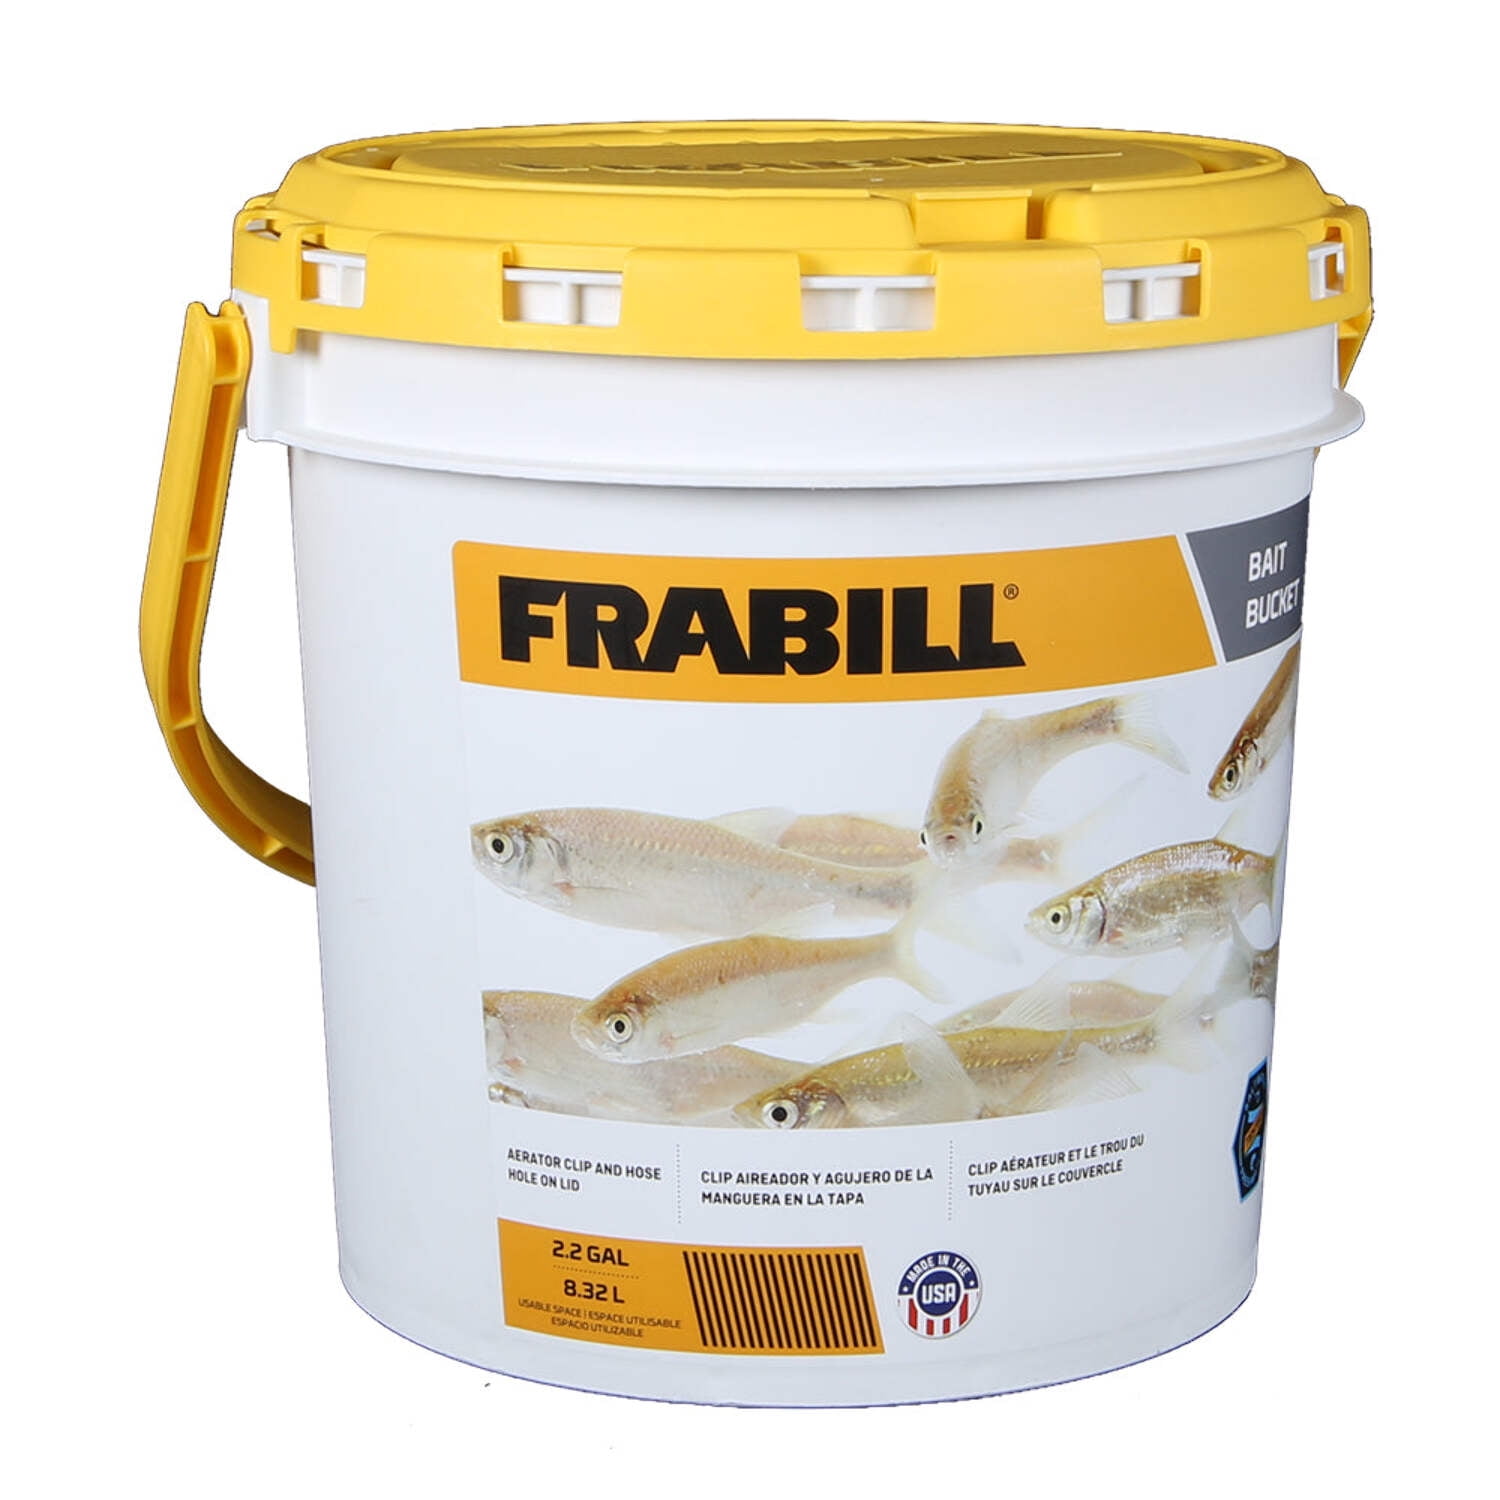 Marine Metal Products Cool Bubbles 8 Qt Insulated Bucket with